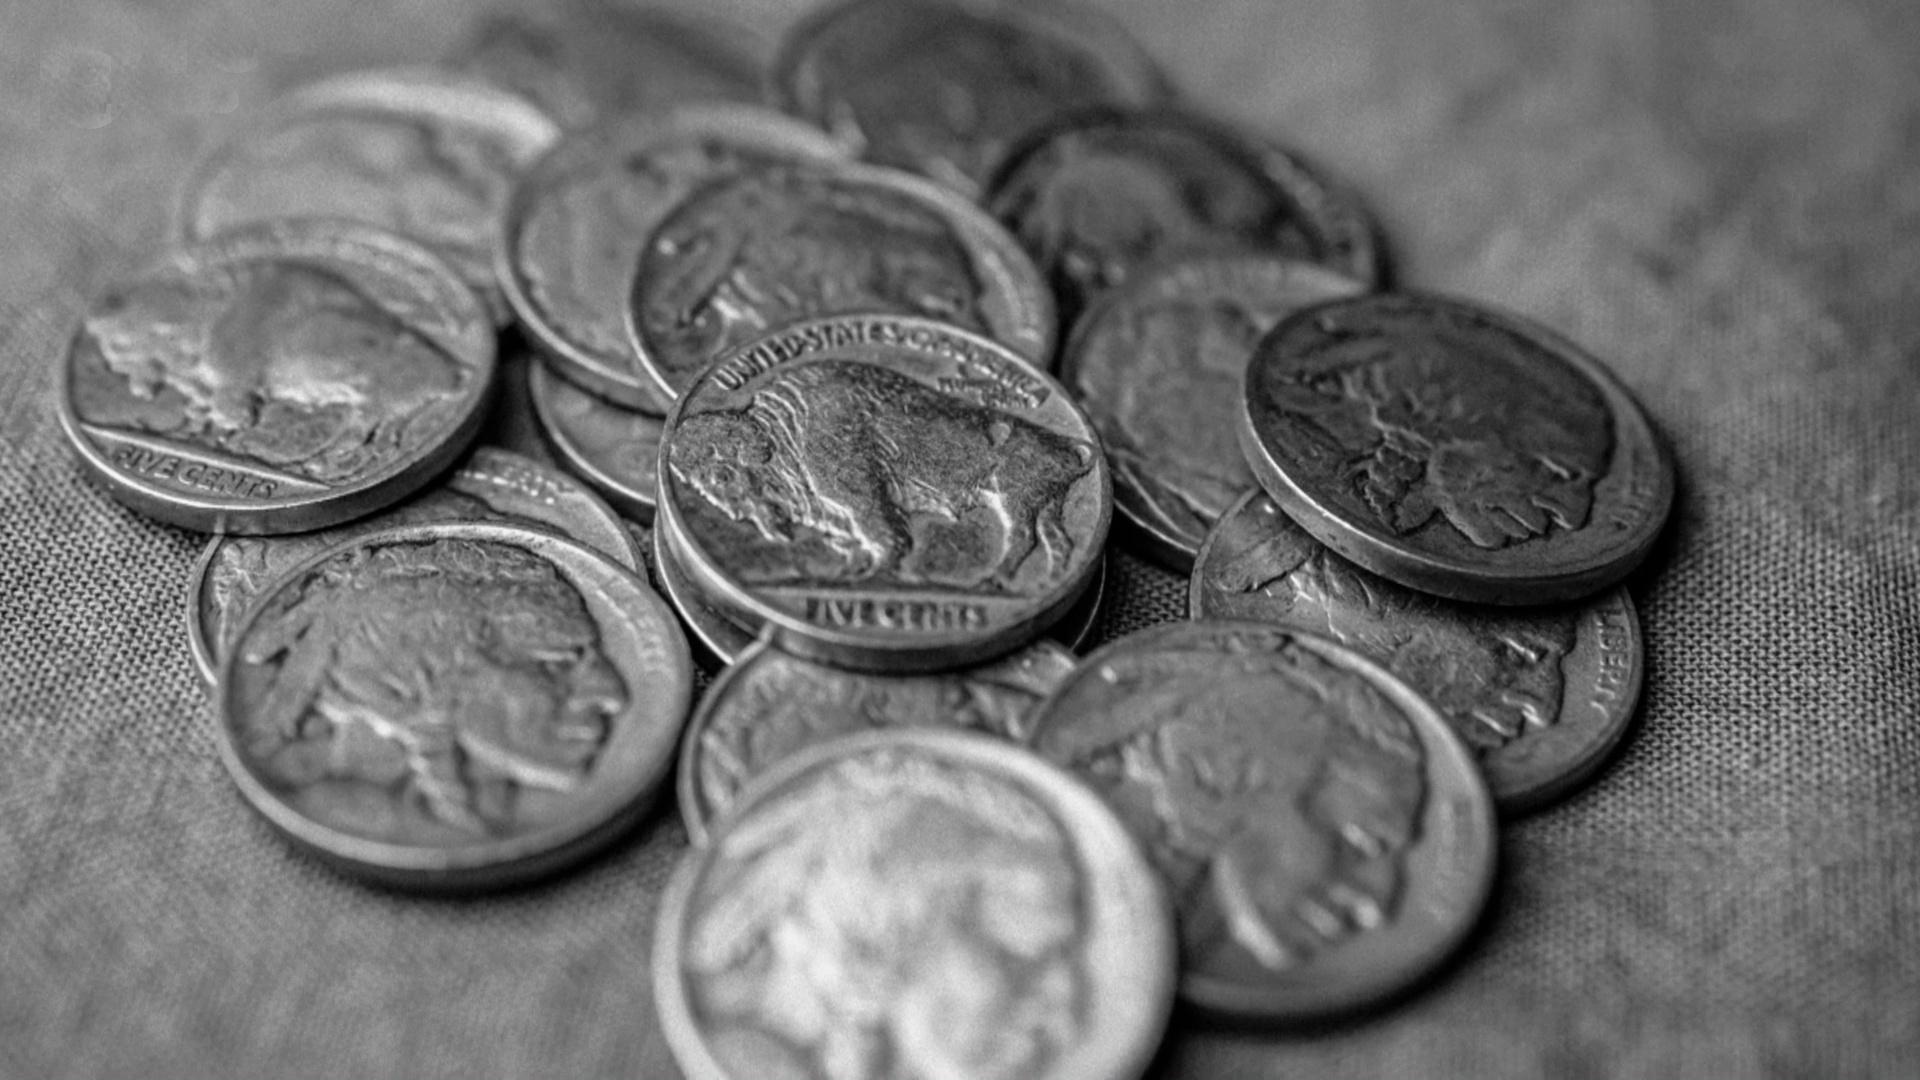 Buffalo nickels: Tips on building a collection and fun facts